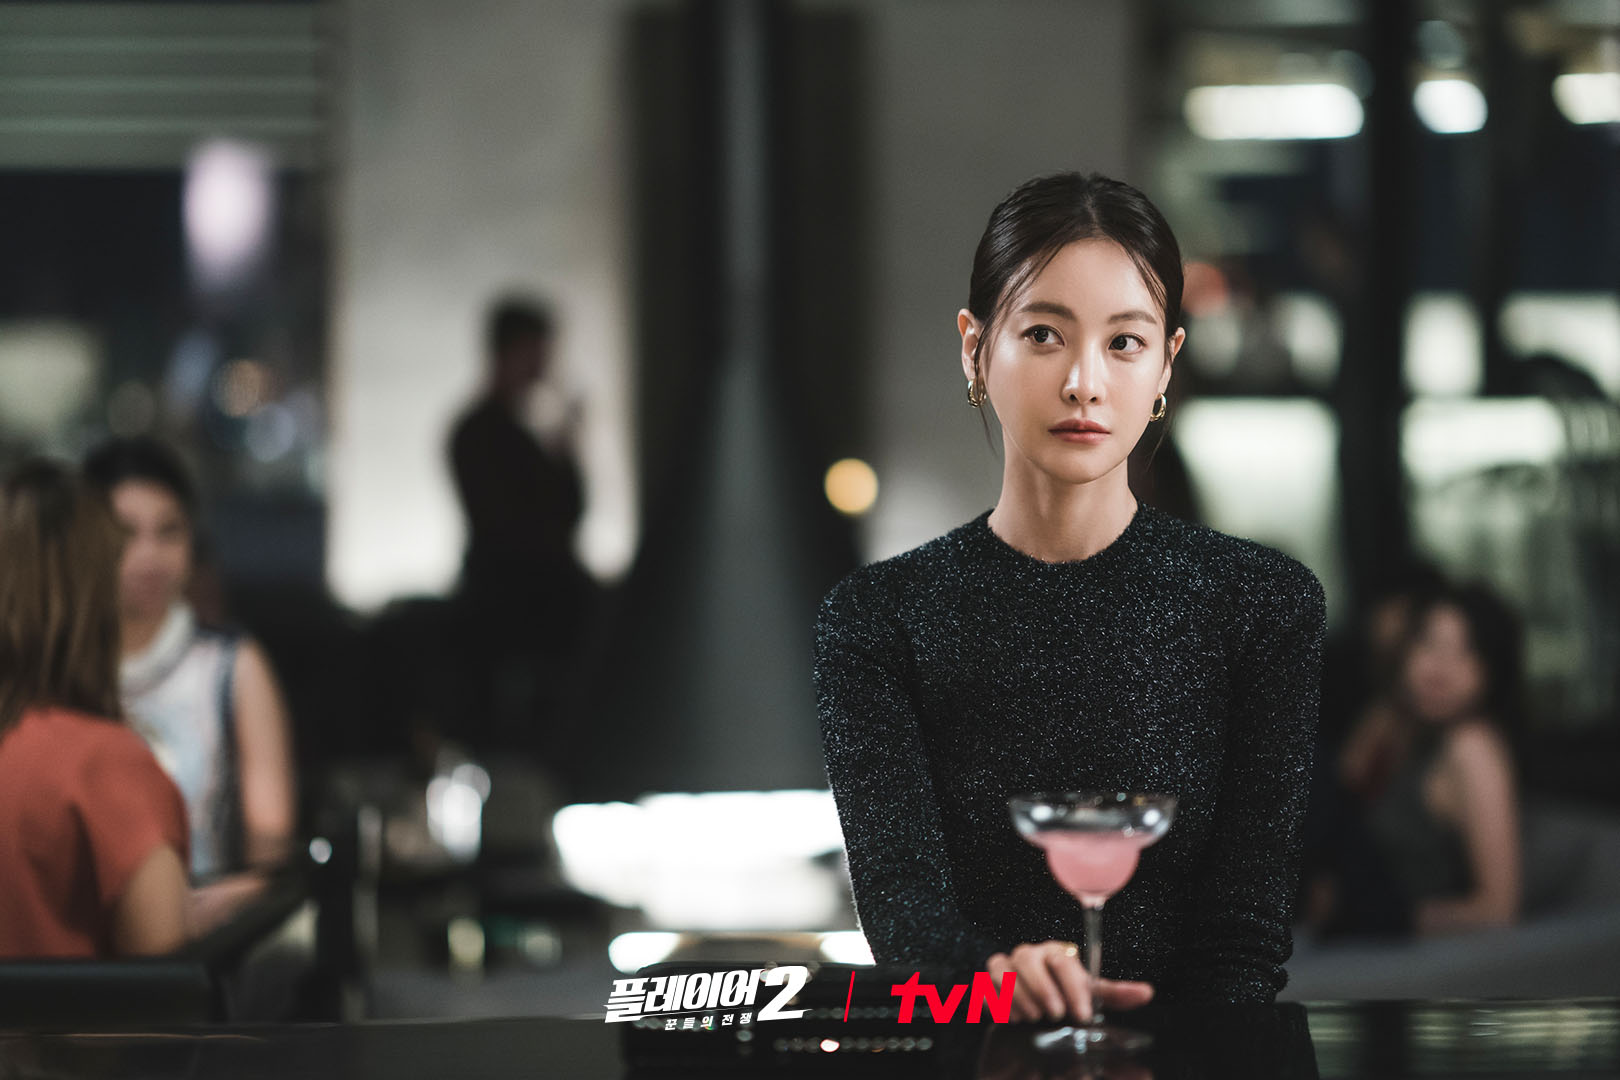 Oh Yeon Seo Is A Mysterious Figure With Hidden Agenda In 